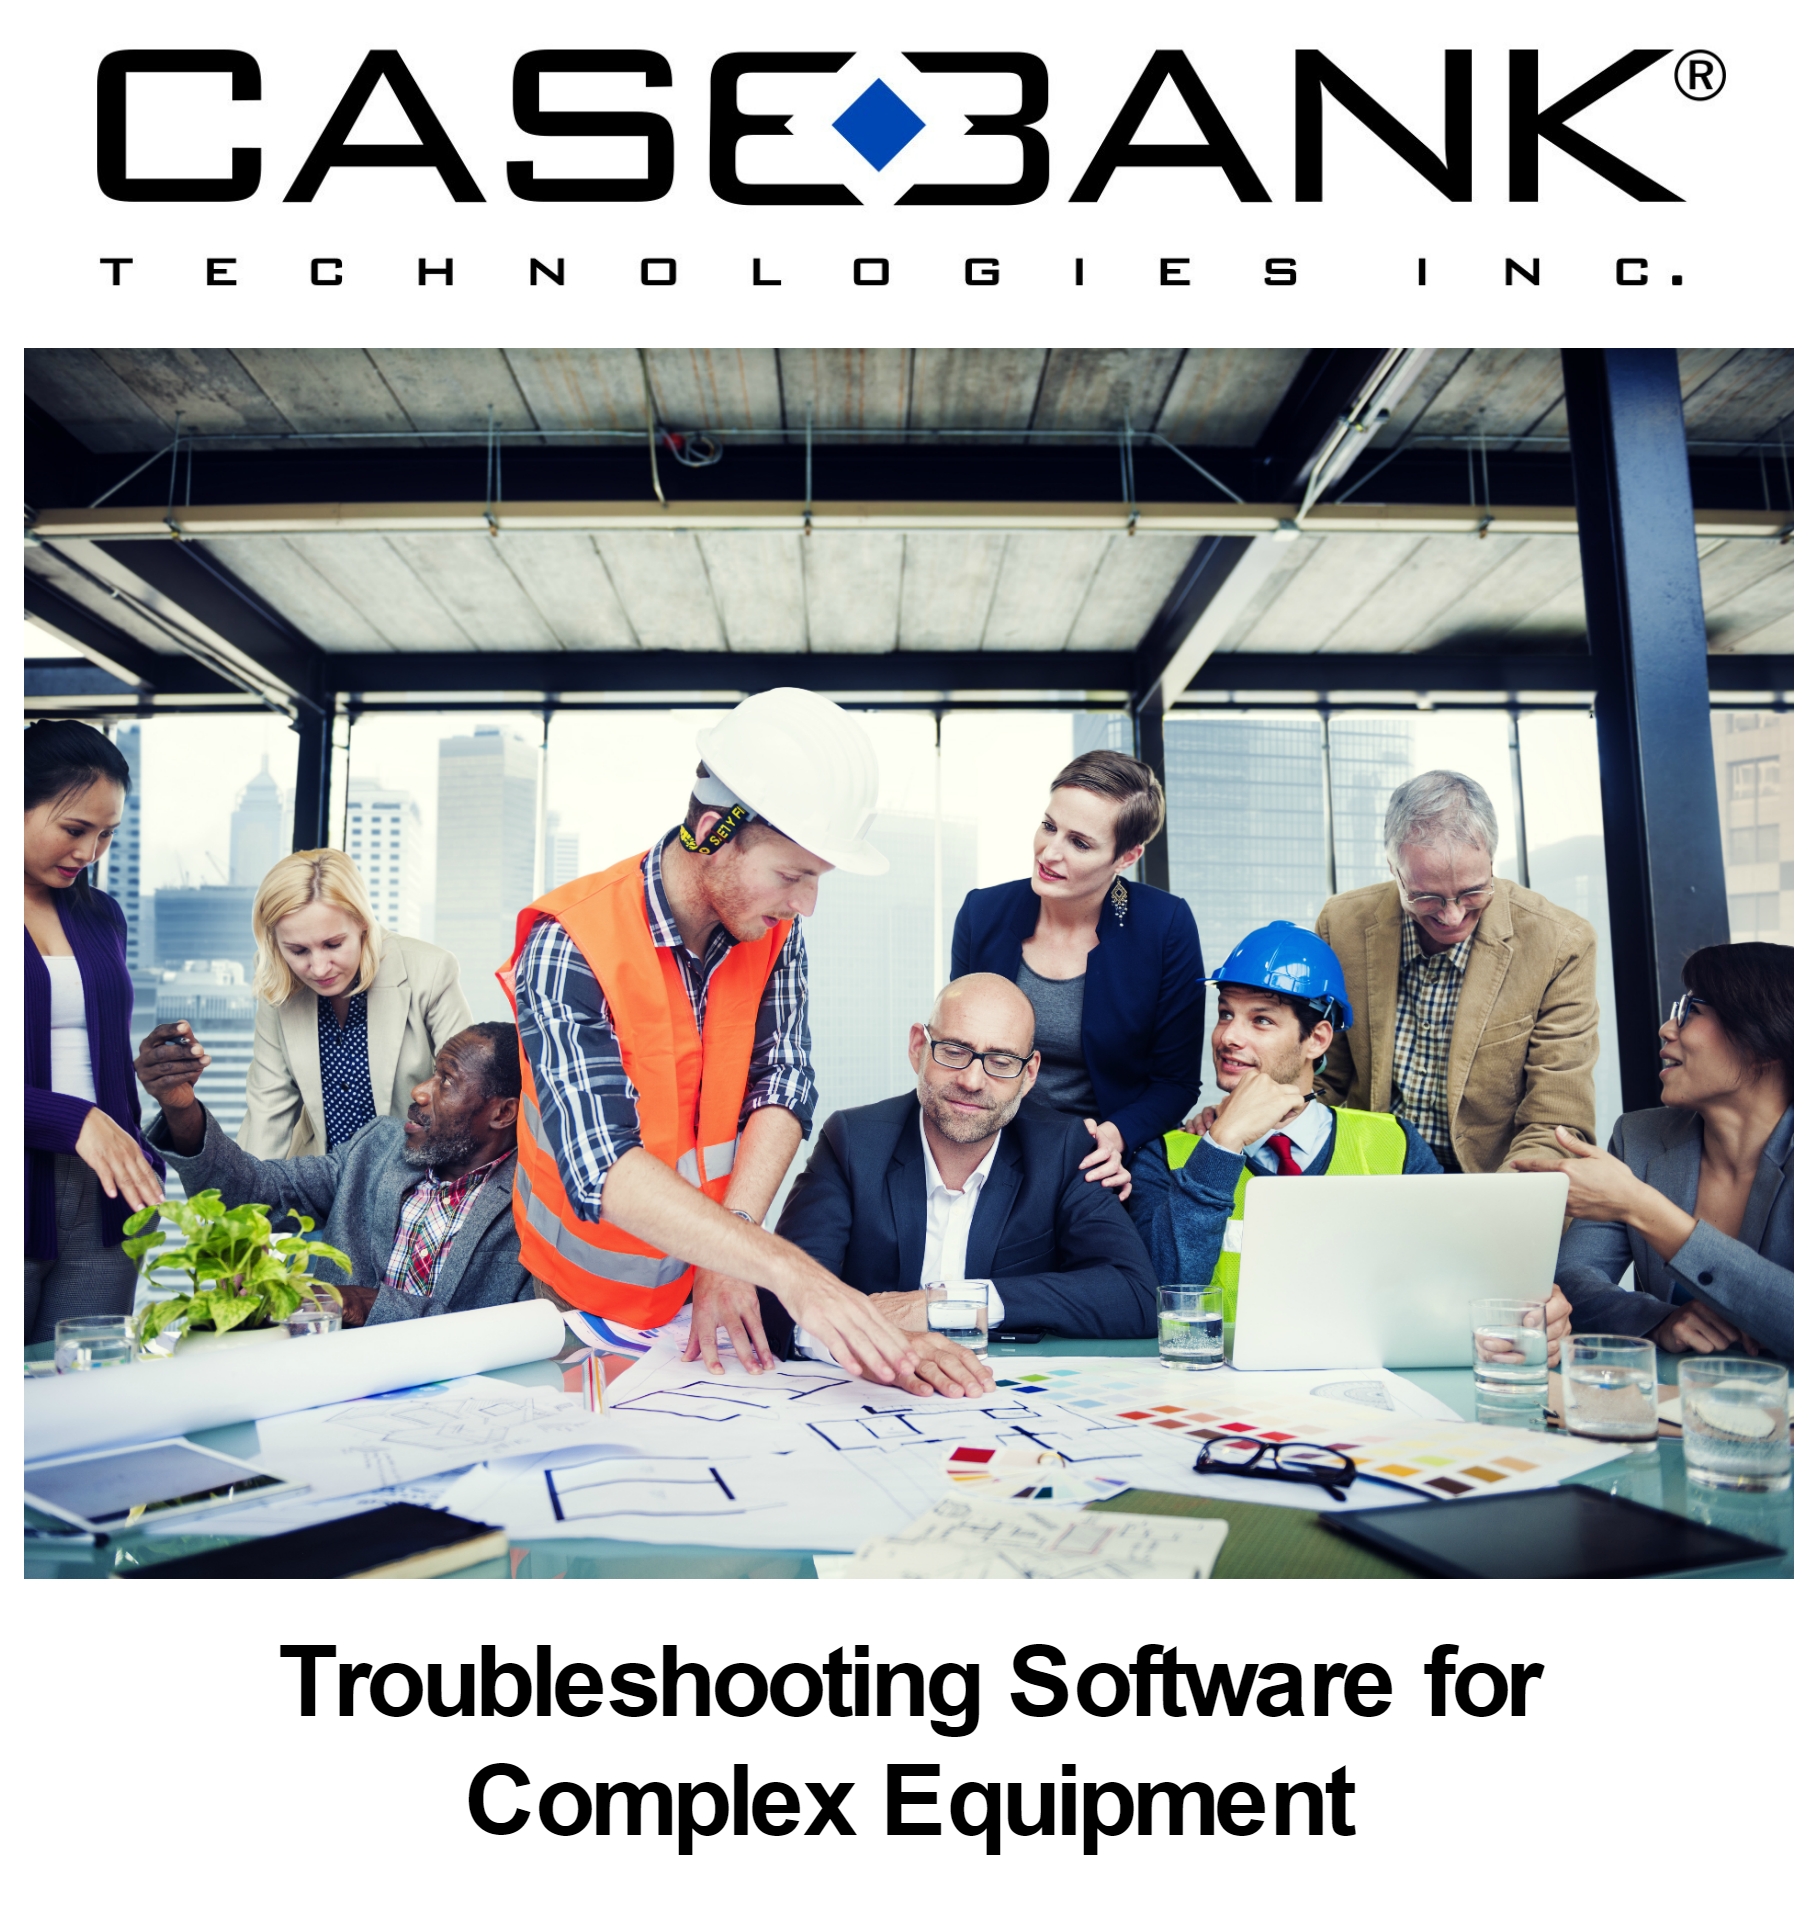 Troubleshooting Software for Complex Equipment